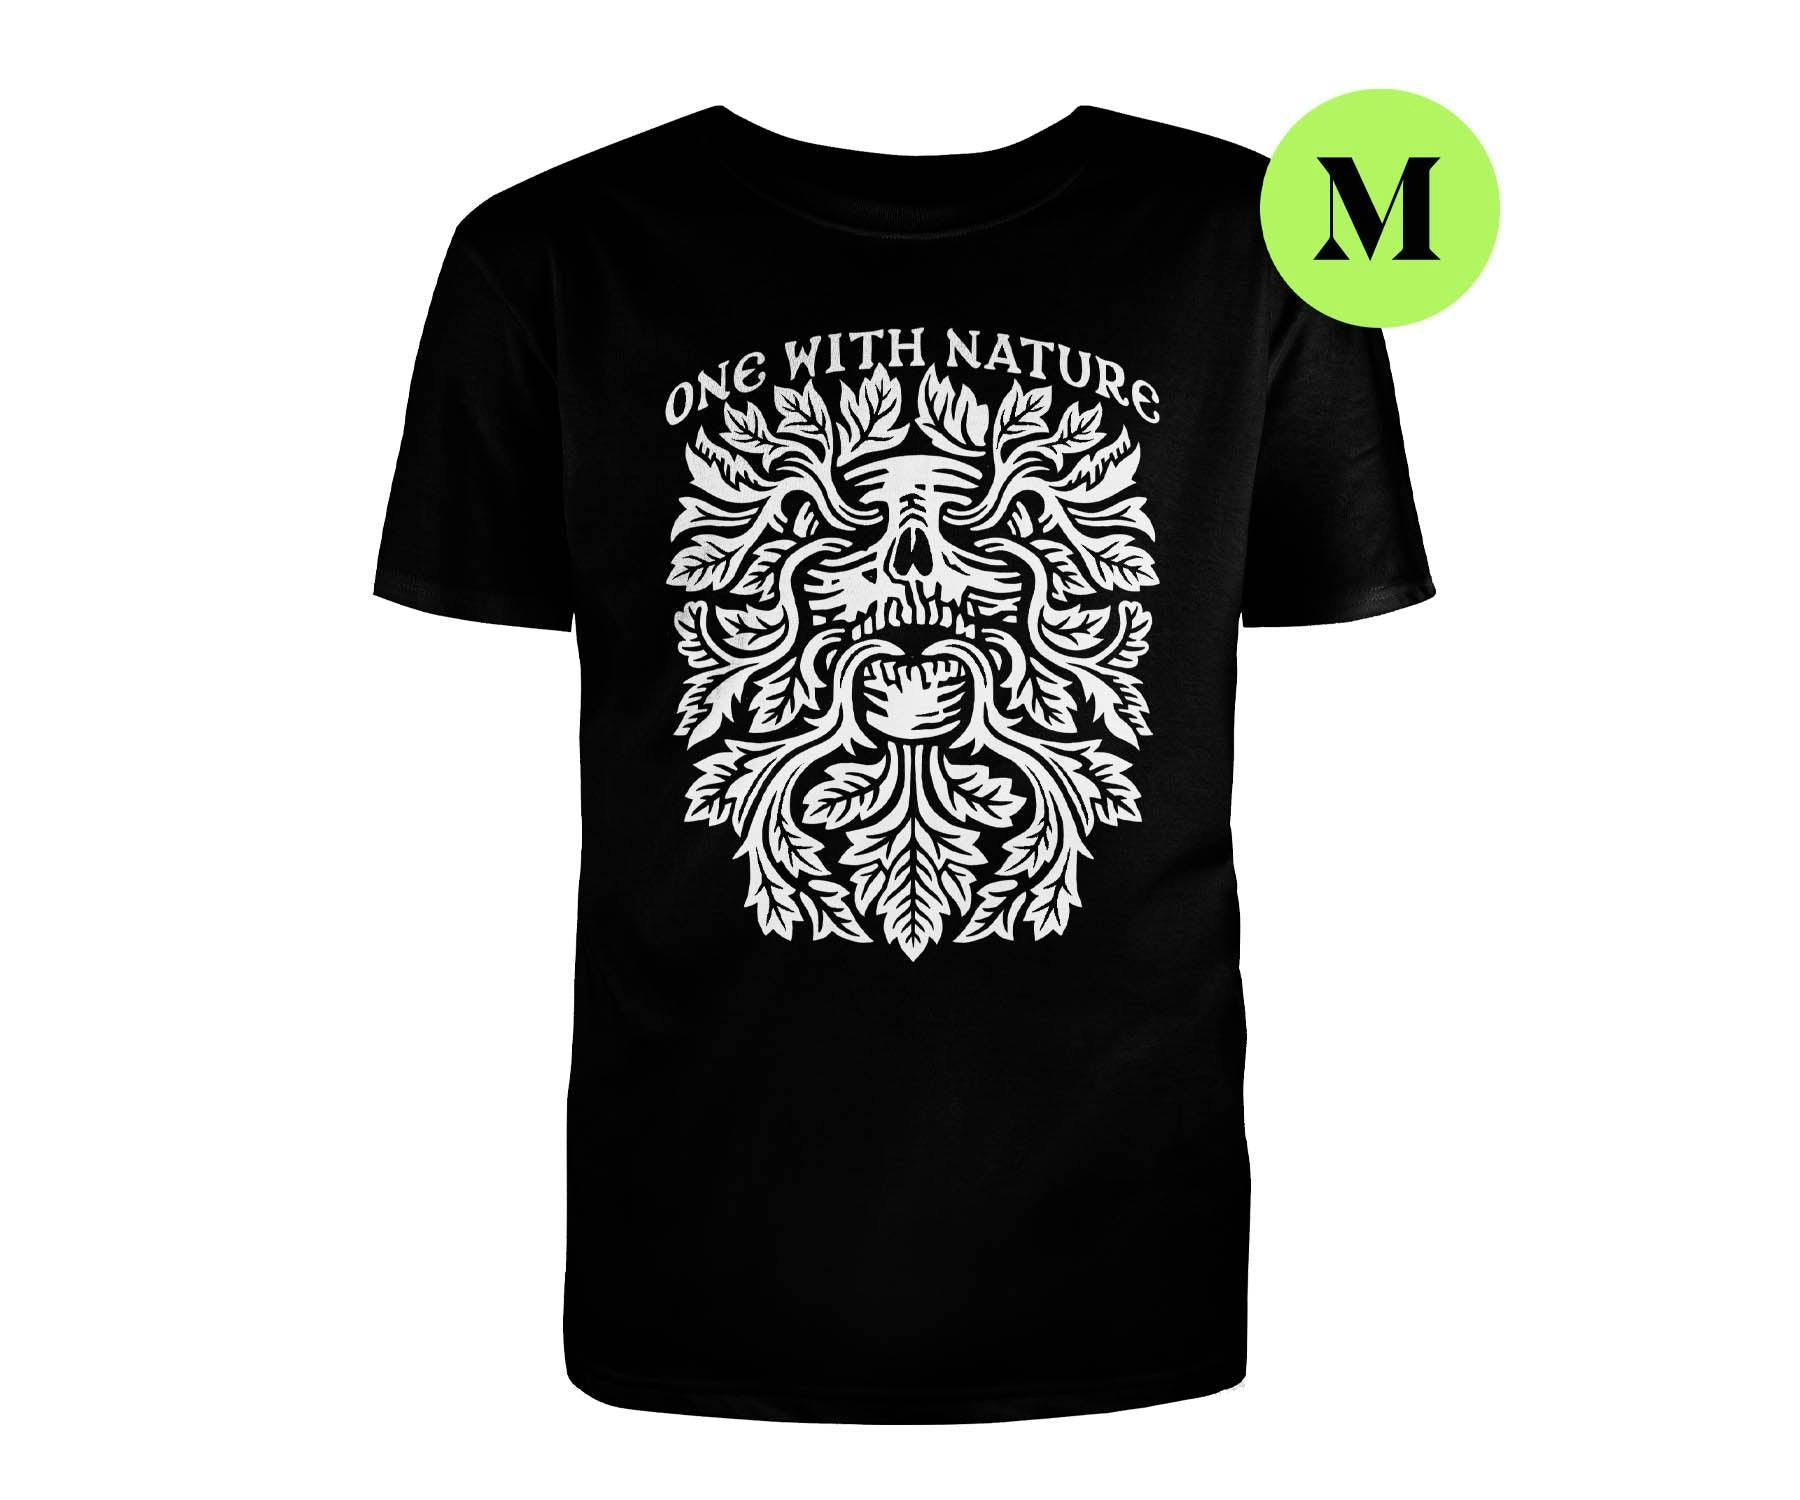 'One With Nature' T-Shirt Only (M)